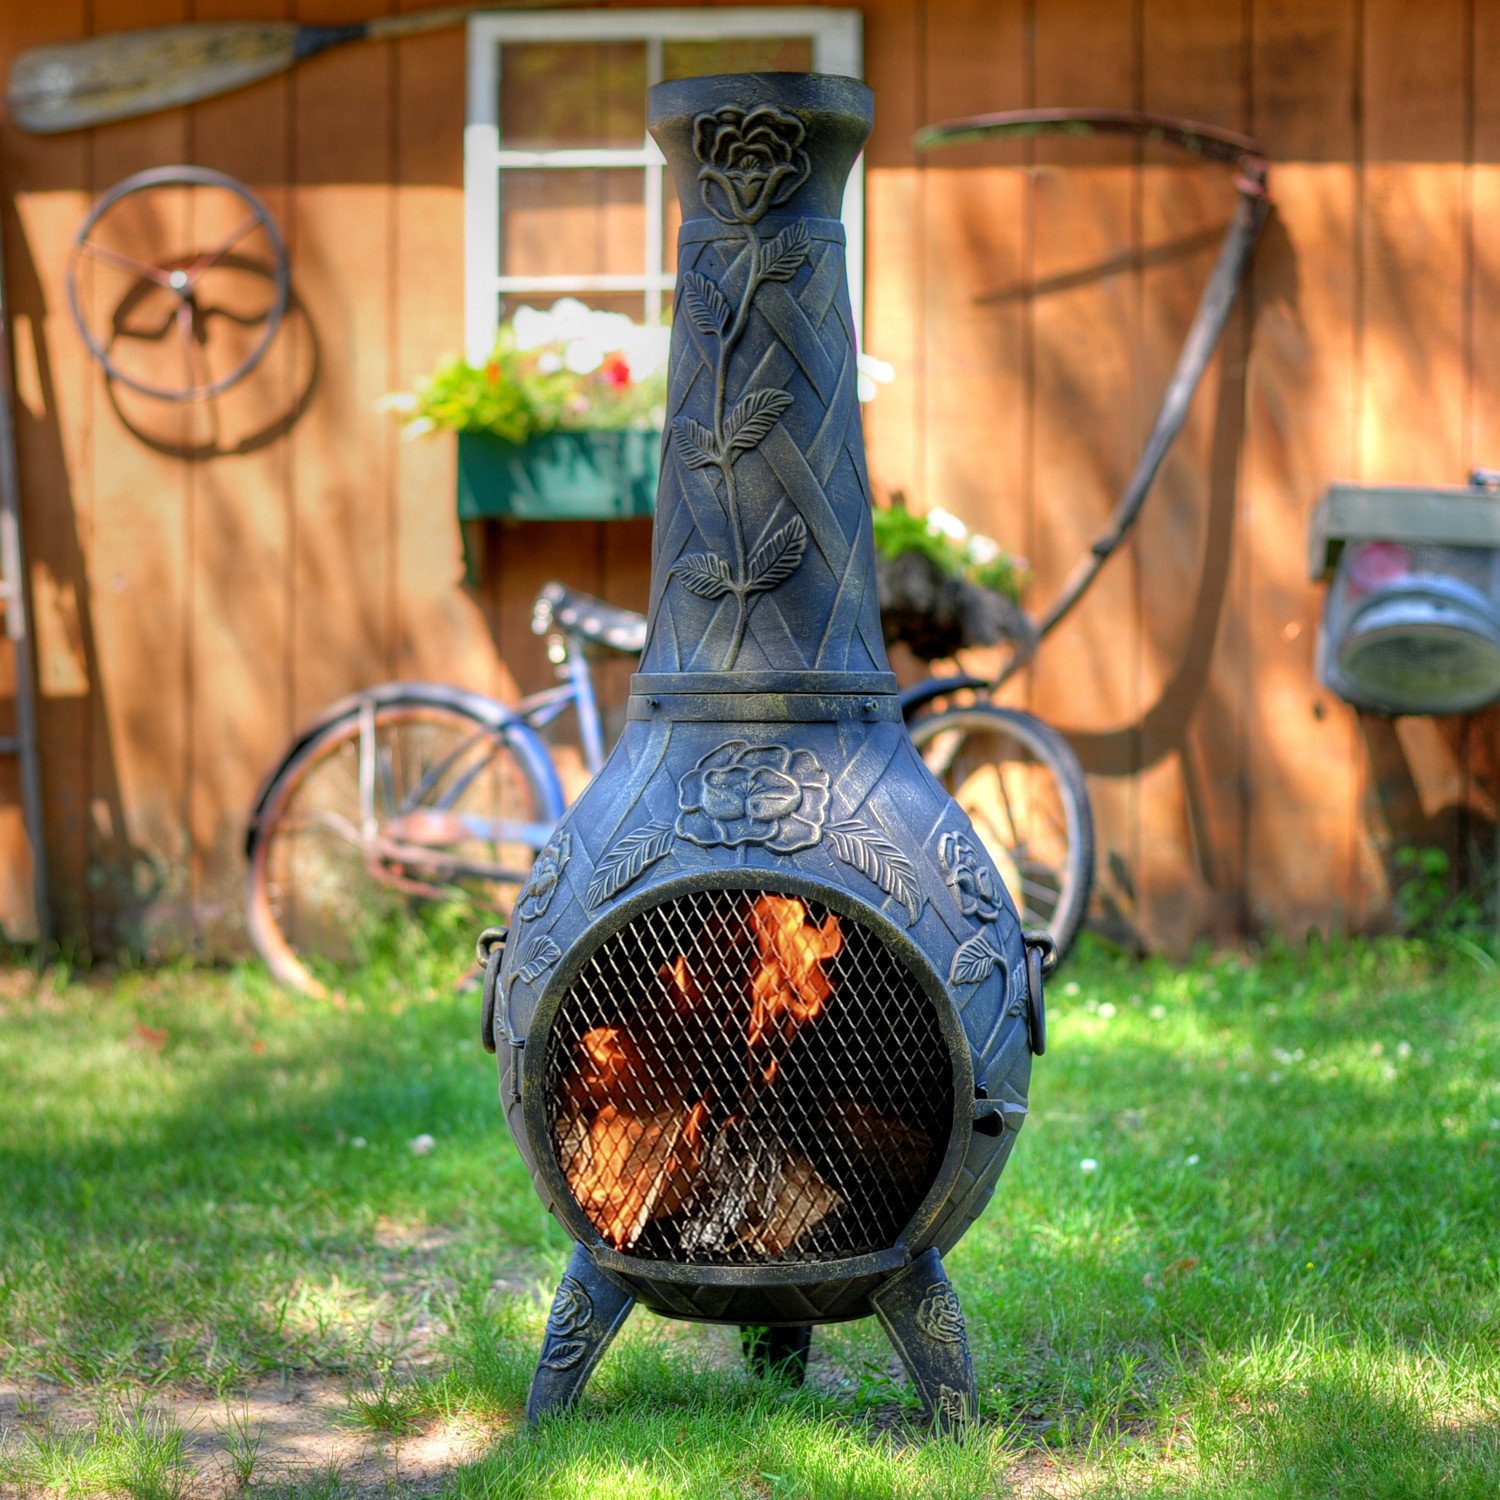 Uniprodo Cast Iron Chiminea Chimney Fire Pit Garden Chiminea Porch Patio Heating 113cm UNI_G_CHIMNEY_03 Height 113cm, Fuels: Wood, Coal, Charcoal